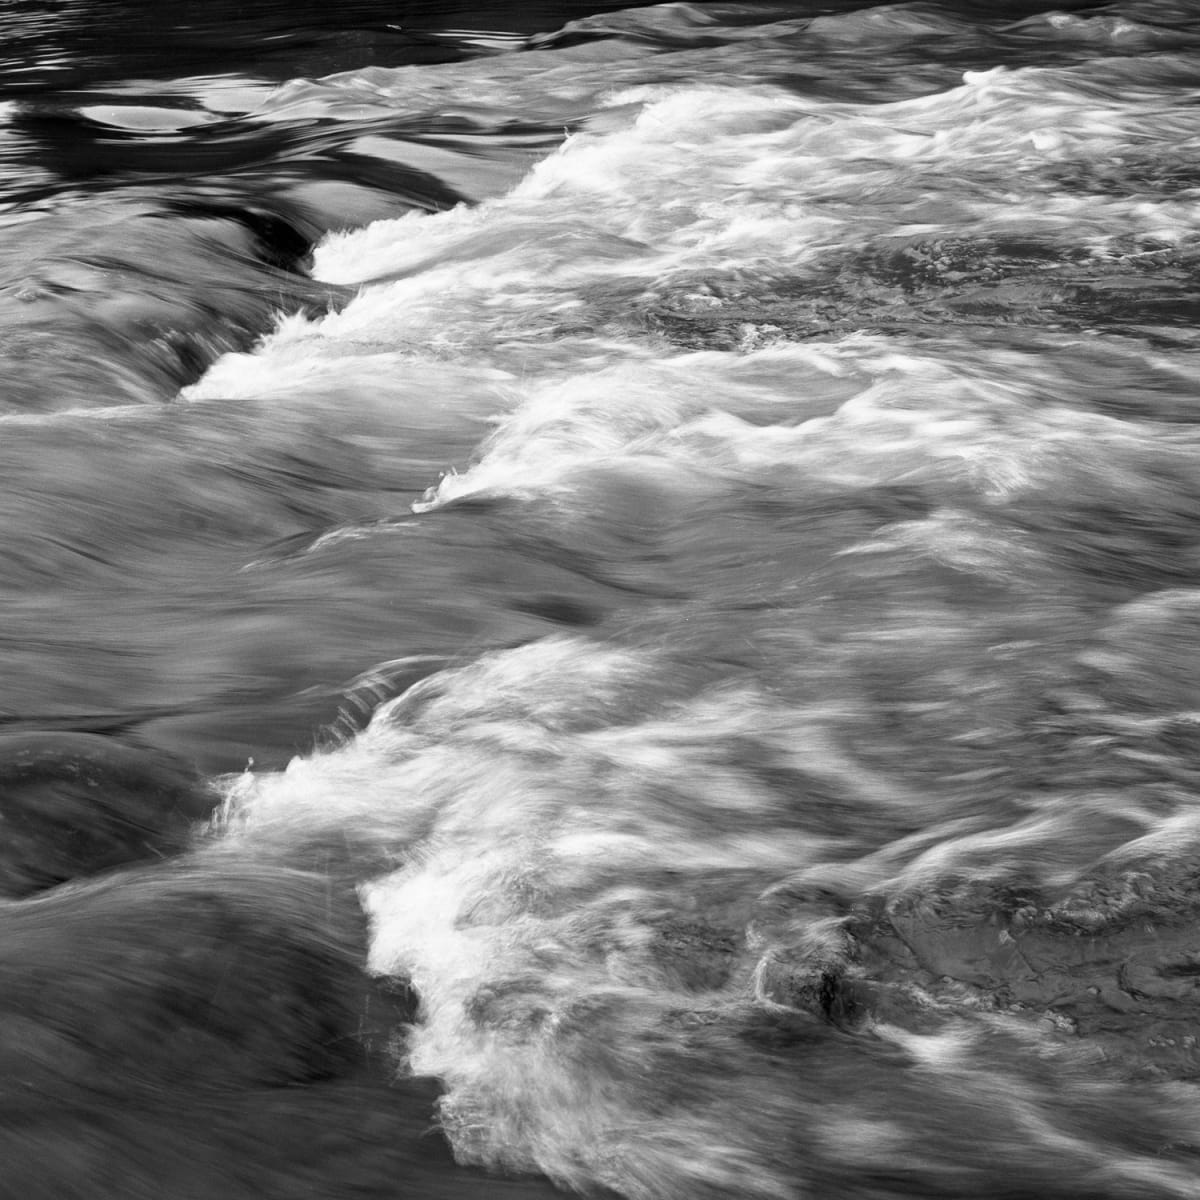 Untitled, Water Series 2015 by Billy Moore  Image: grayscale image of moving water